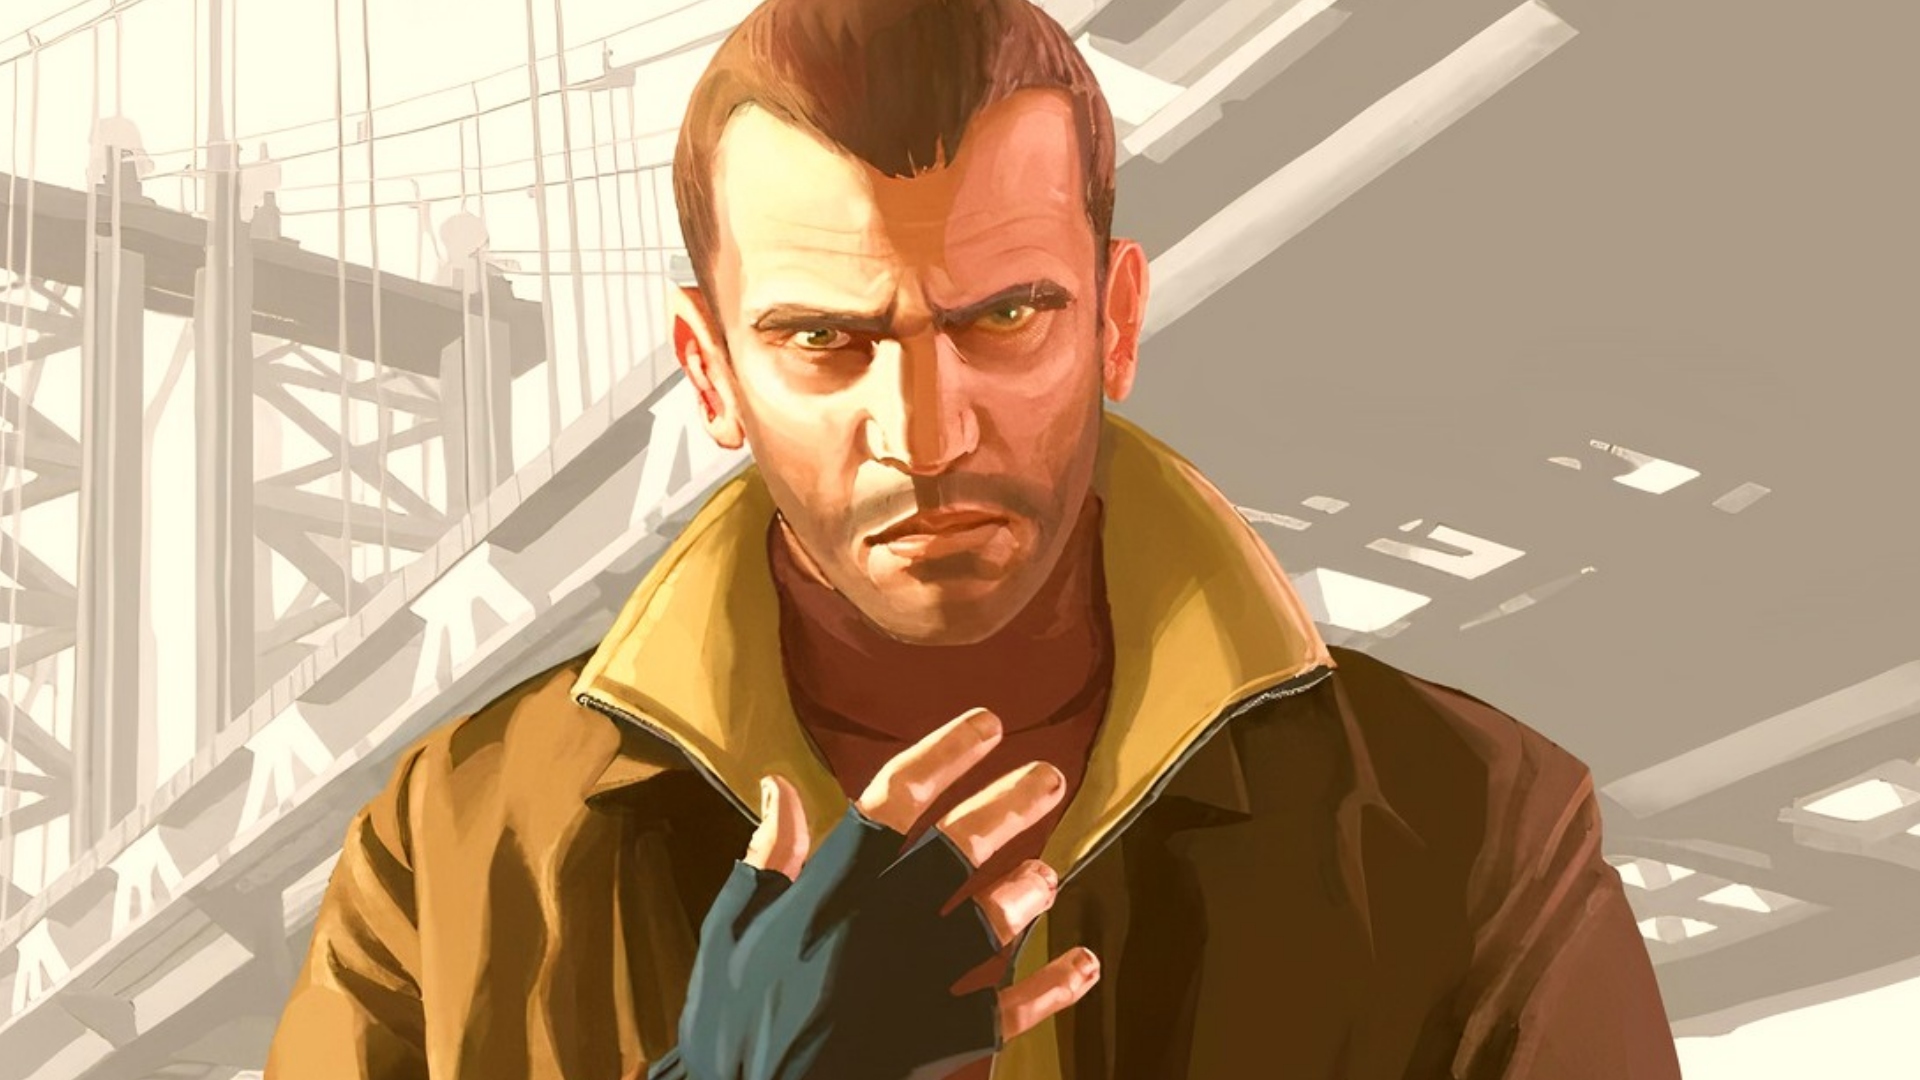 gta-5-apk-and-obb-files-on-internet-are-fake-game-yet-to-receive